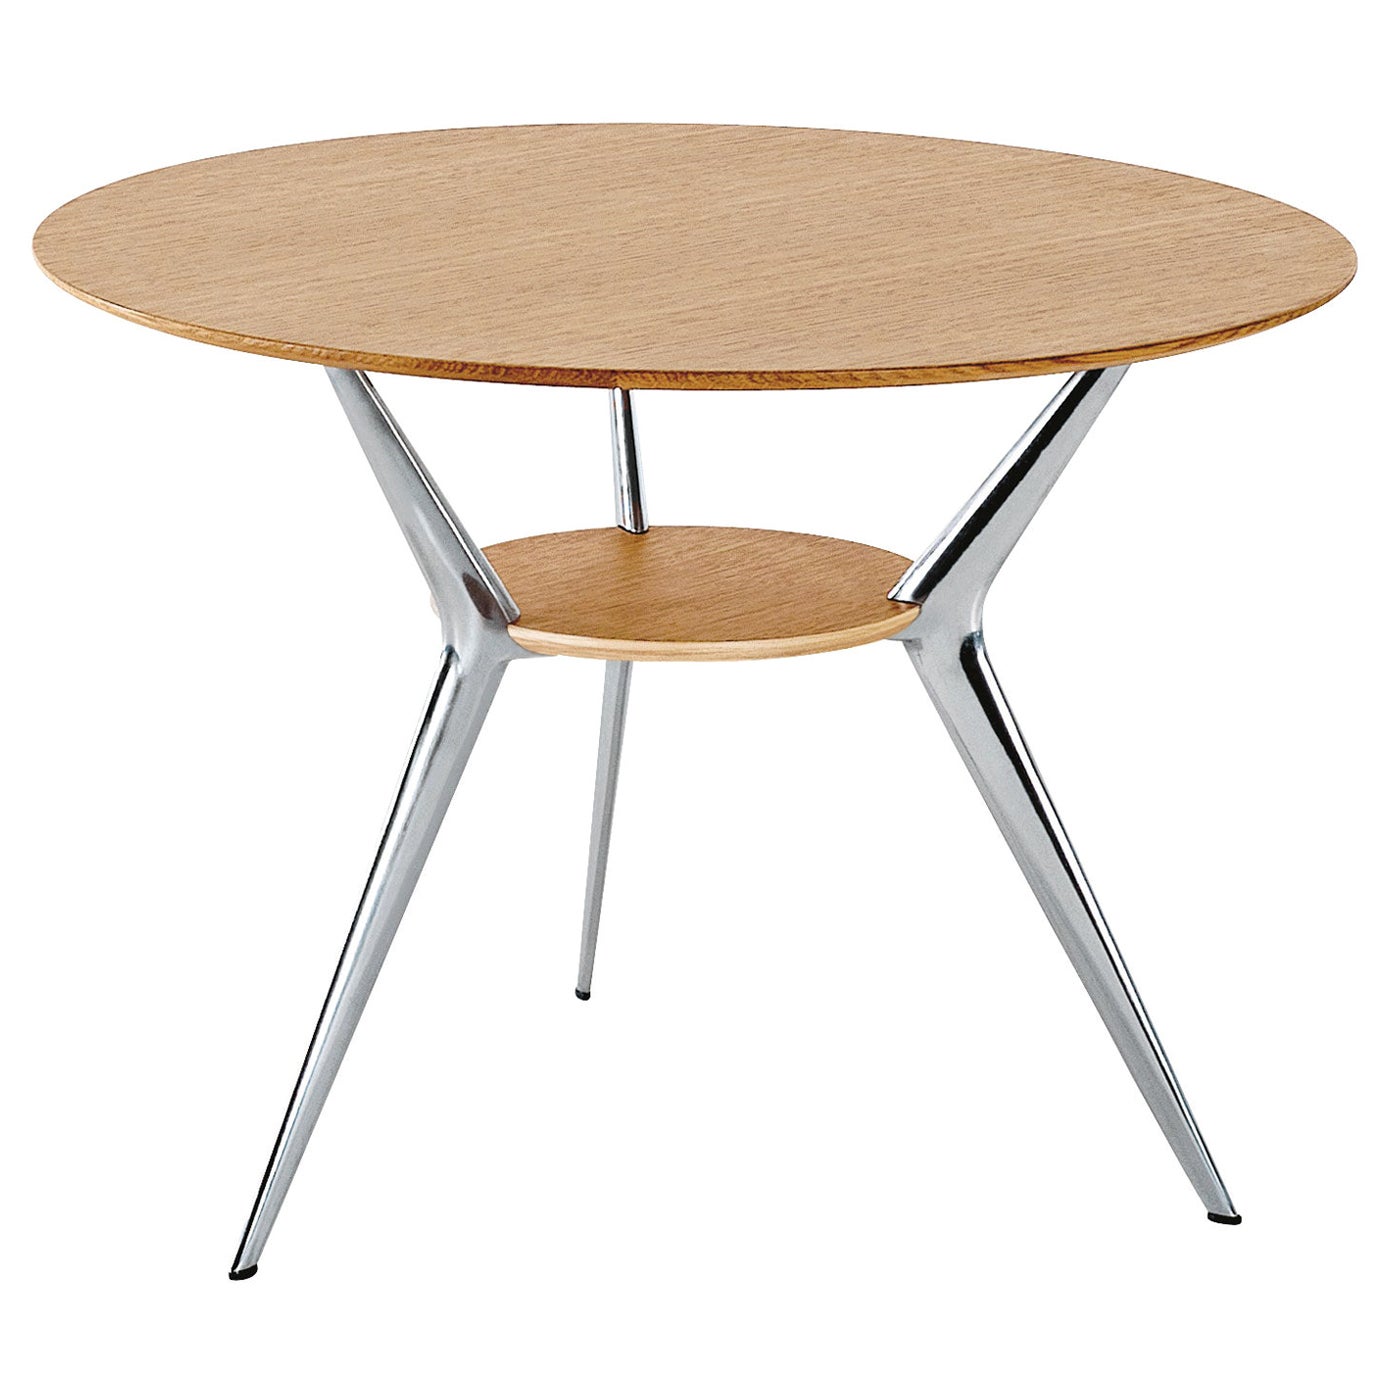 Alias Biplane XS Ø62 Table in Oak Top with Polished Aluminium Frame